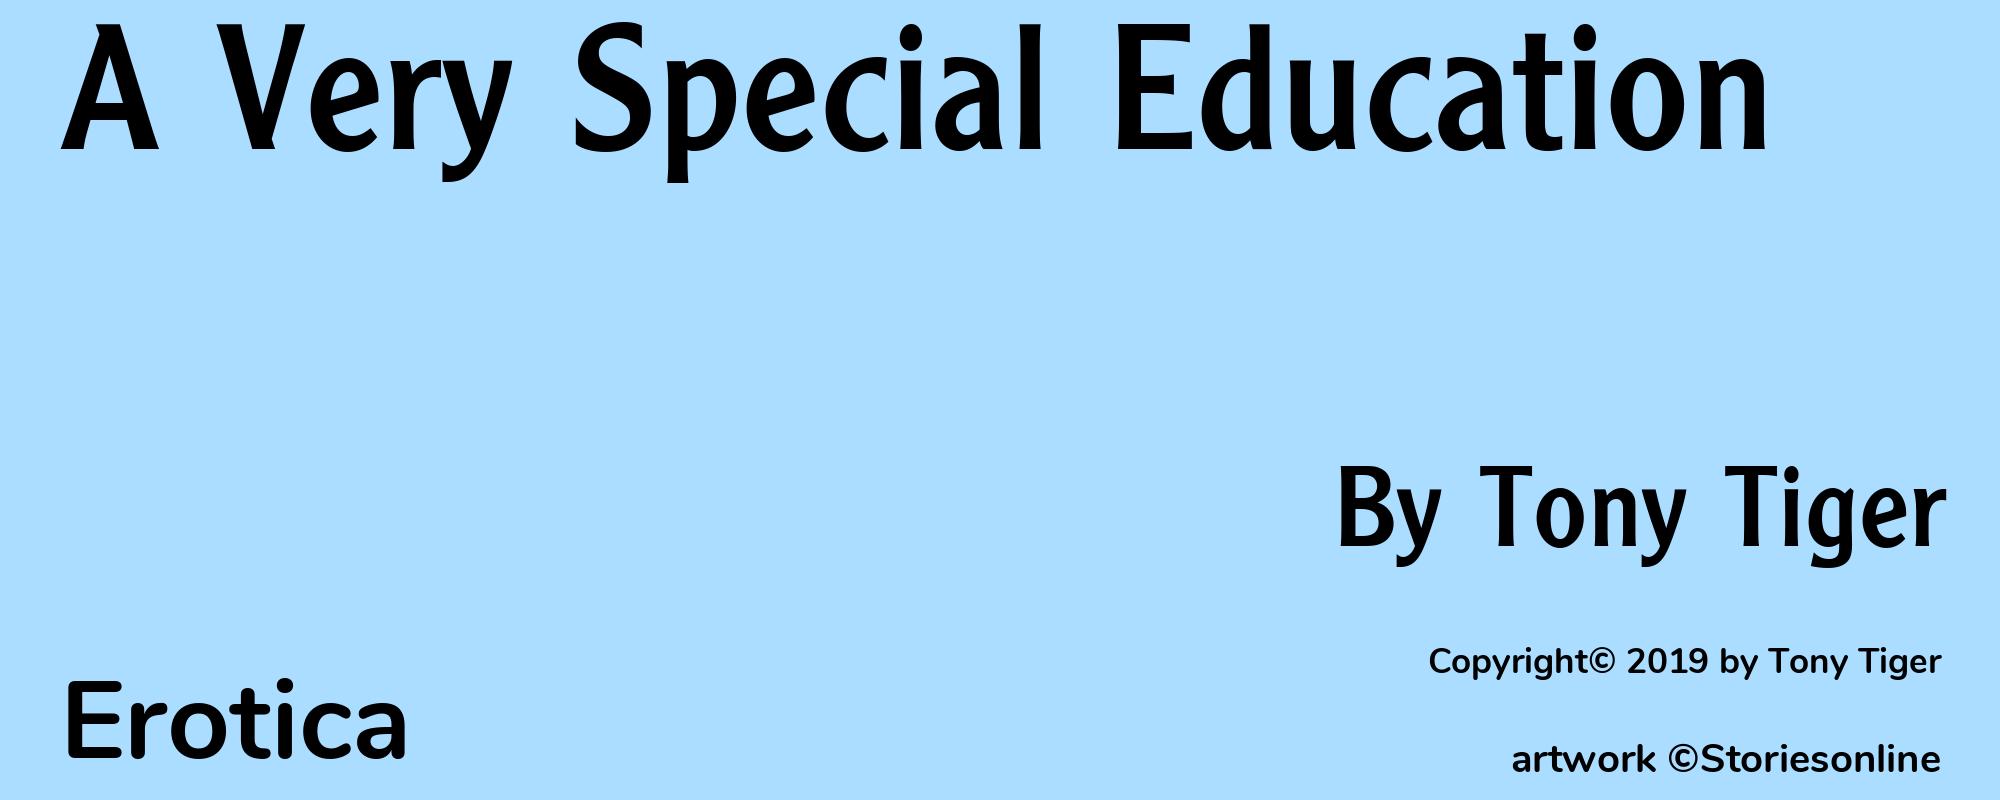 A Very Special Education - Cover